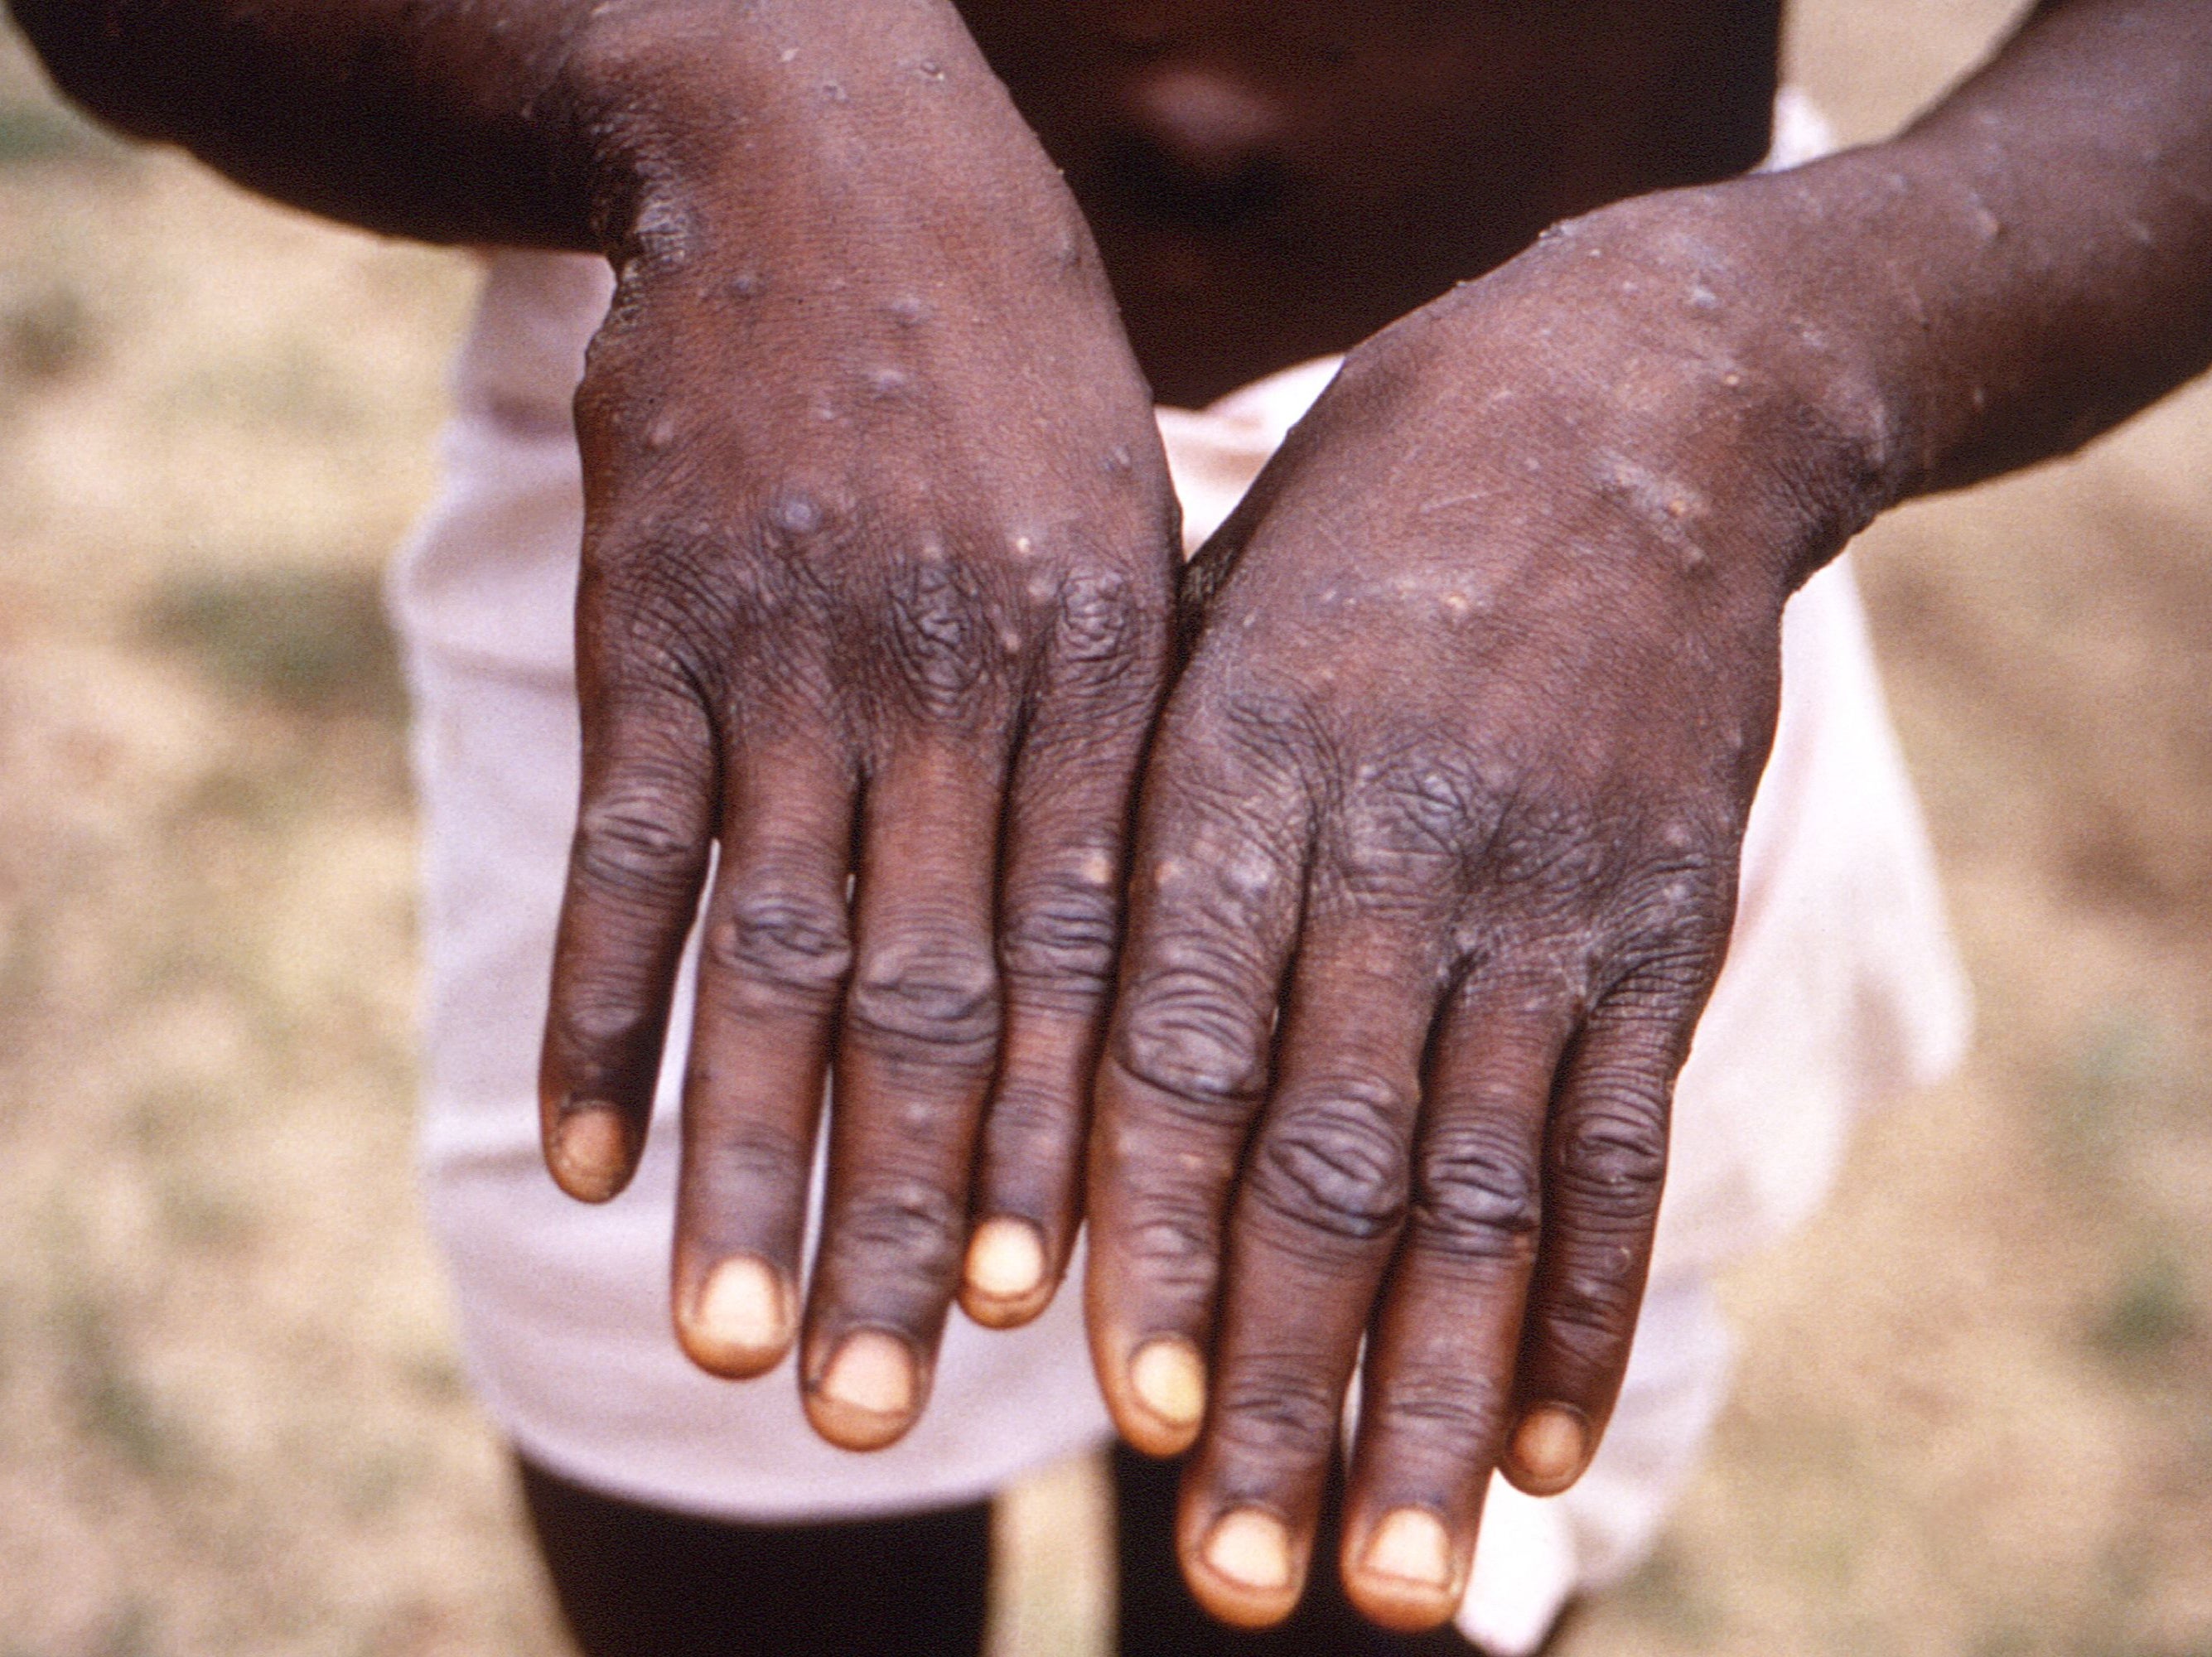 Monkeypox continues to spread across the globe